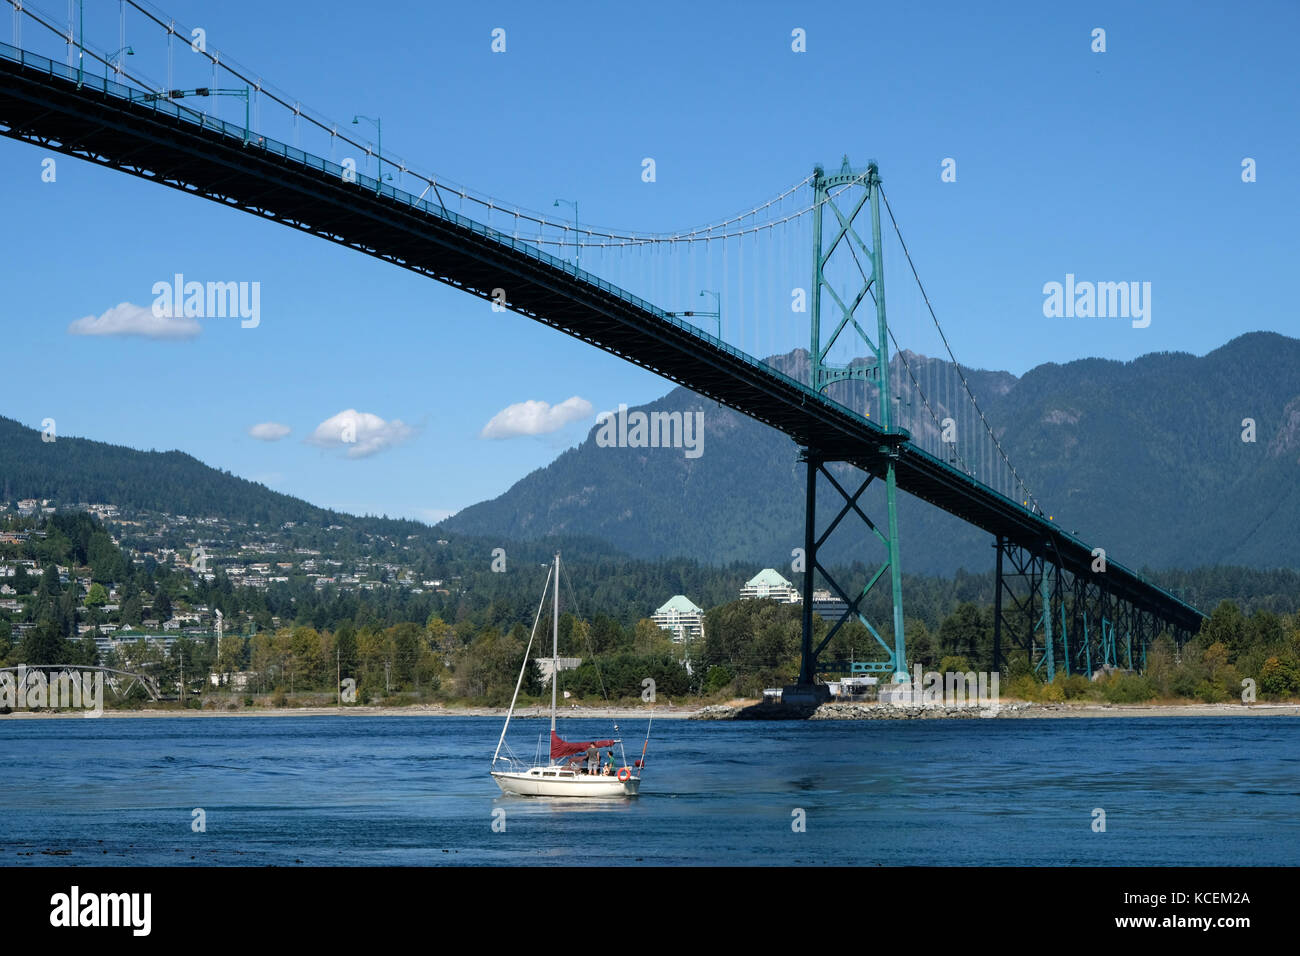 The Lions Gate Bridge across the narrows of Burrard Inlet in Vancouver, British Columbia, Canada. The bridge opened in 1938 and connects the City of V Stock Photo